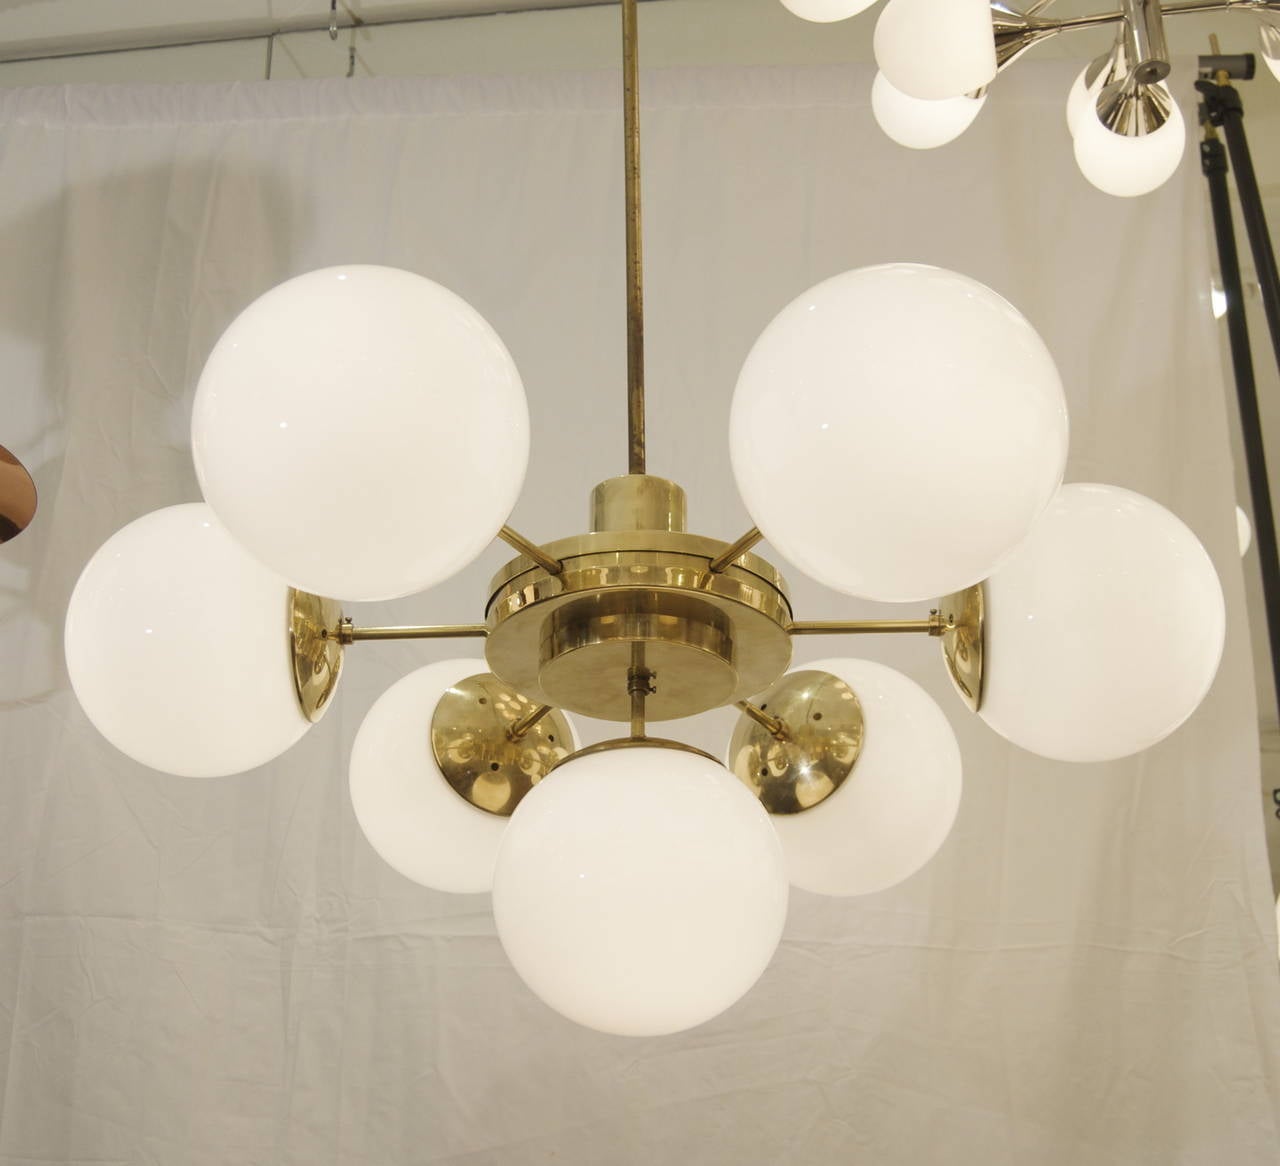 A pair of truly unique Bauhaus style Weimar era chandeliers in high polished brass, radiating six gloss white globes from the central disc body with a seventh globe downward.

Fully original solid brass construction, original globes and